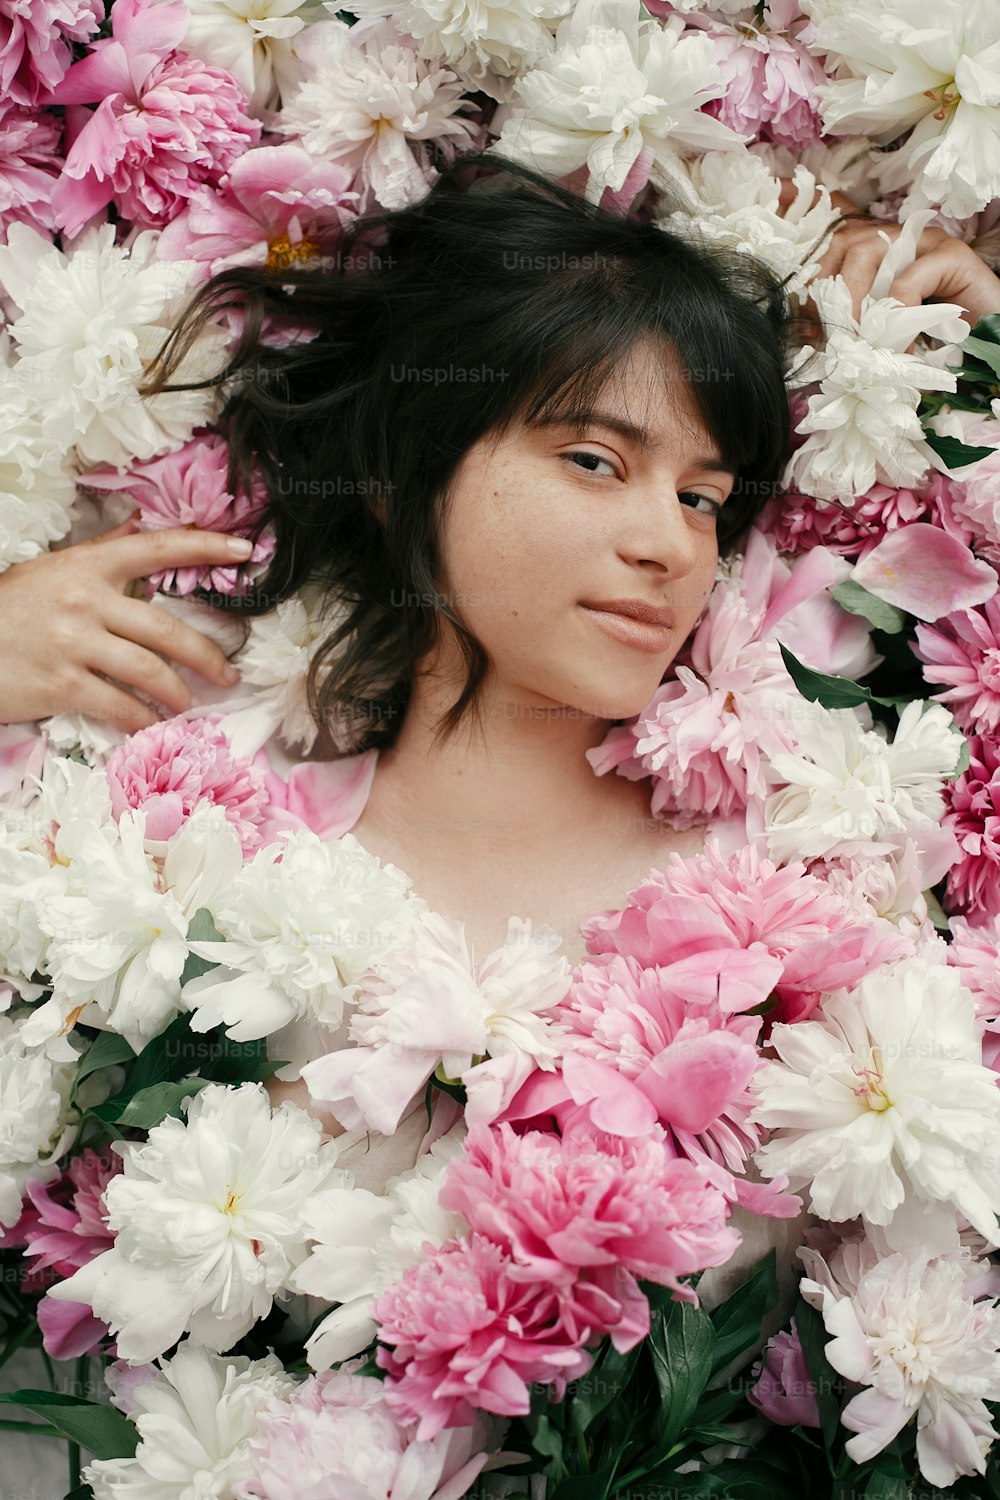 Beautiful brunette girl lying in many pink and white peonies. Boho woman portrait with natural makeup in peony flowers. Creative floral photo. Aroma scent concept. International Womens Day